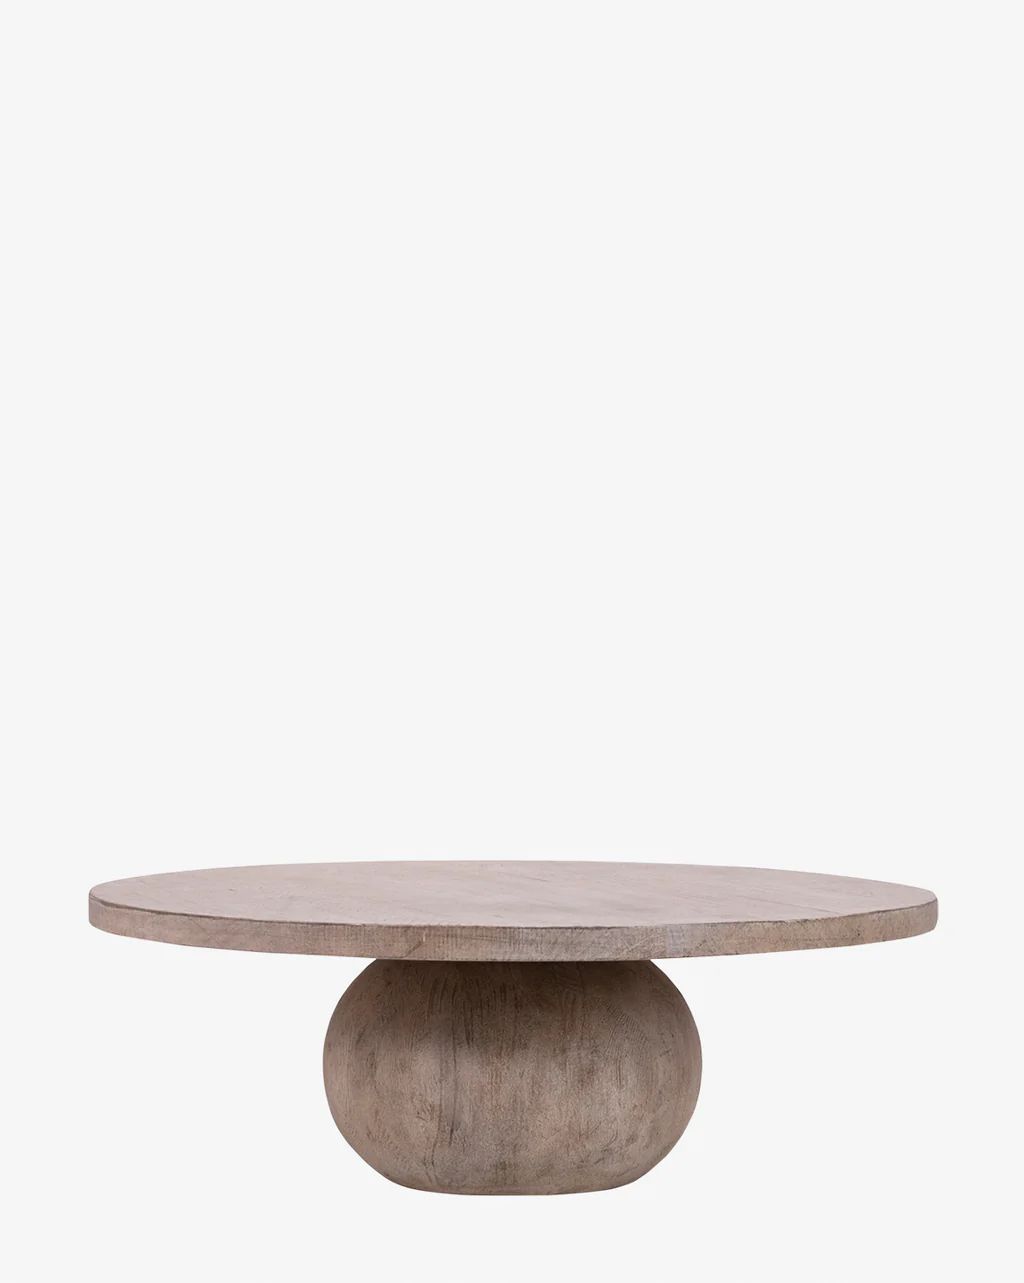 Beddor Coffee Table | McGee & Co.